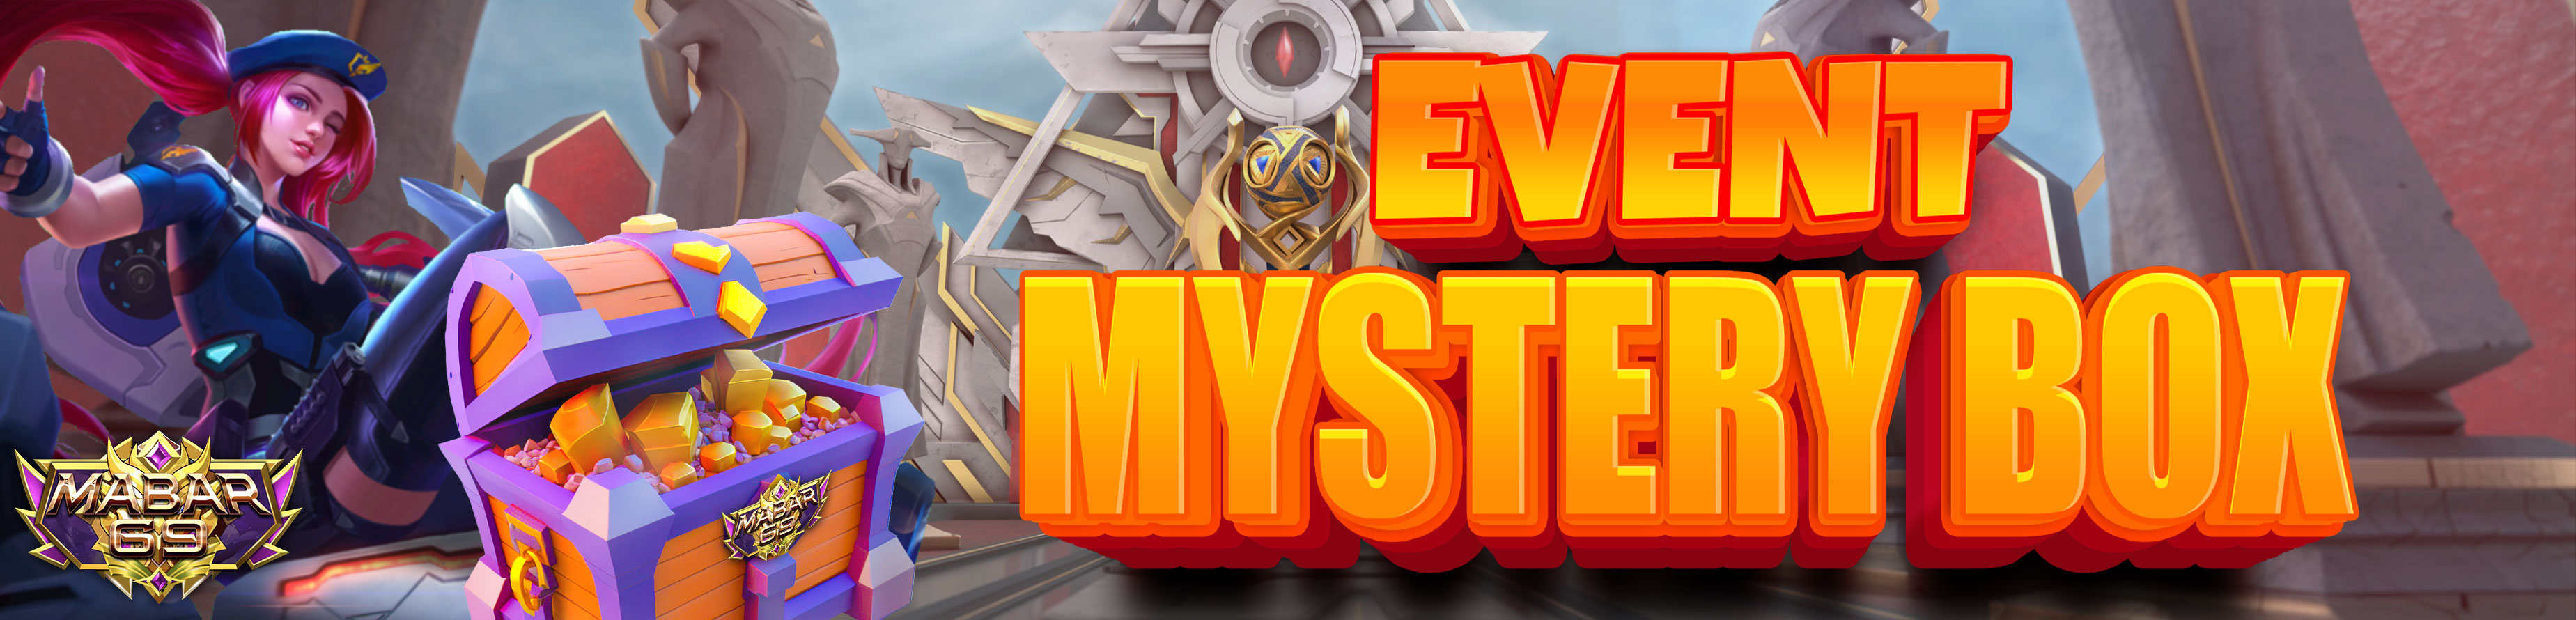 EVENT MYSTERY BOX